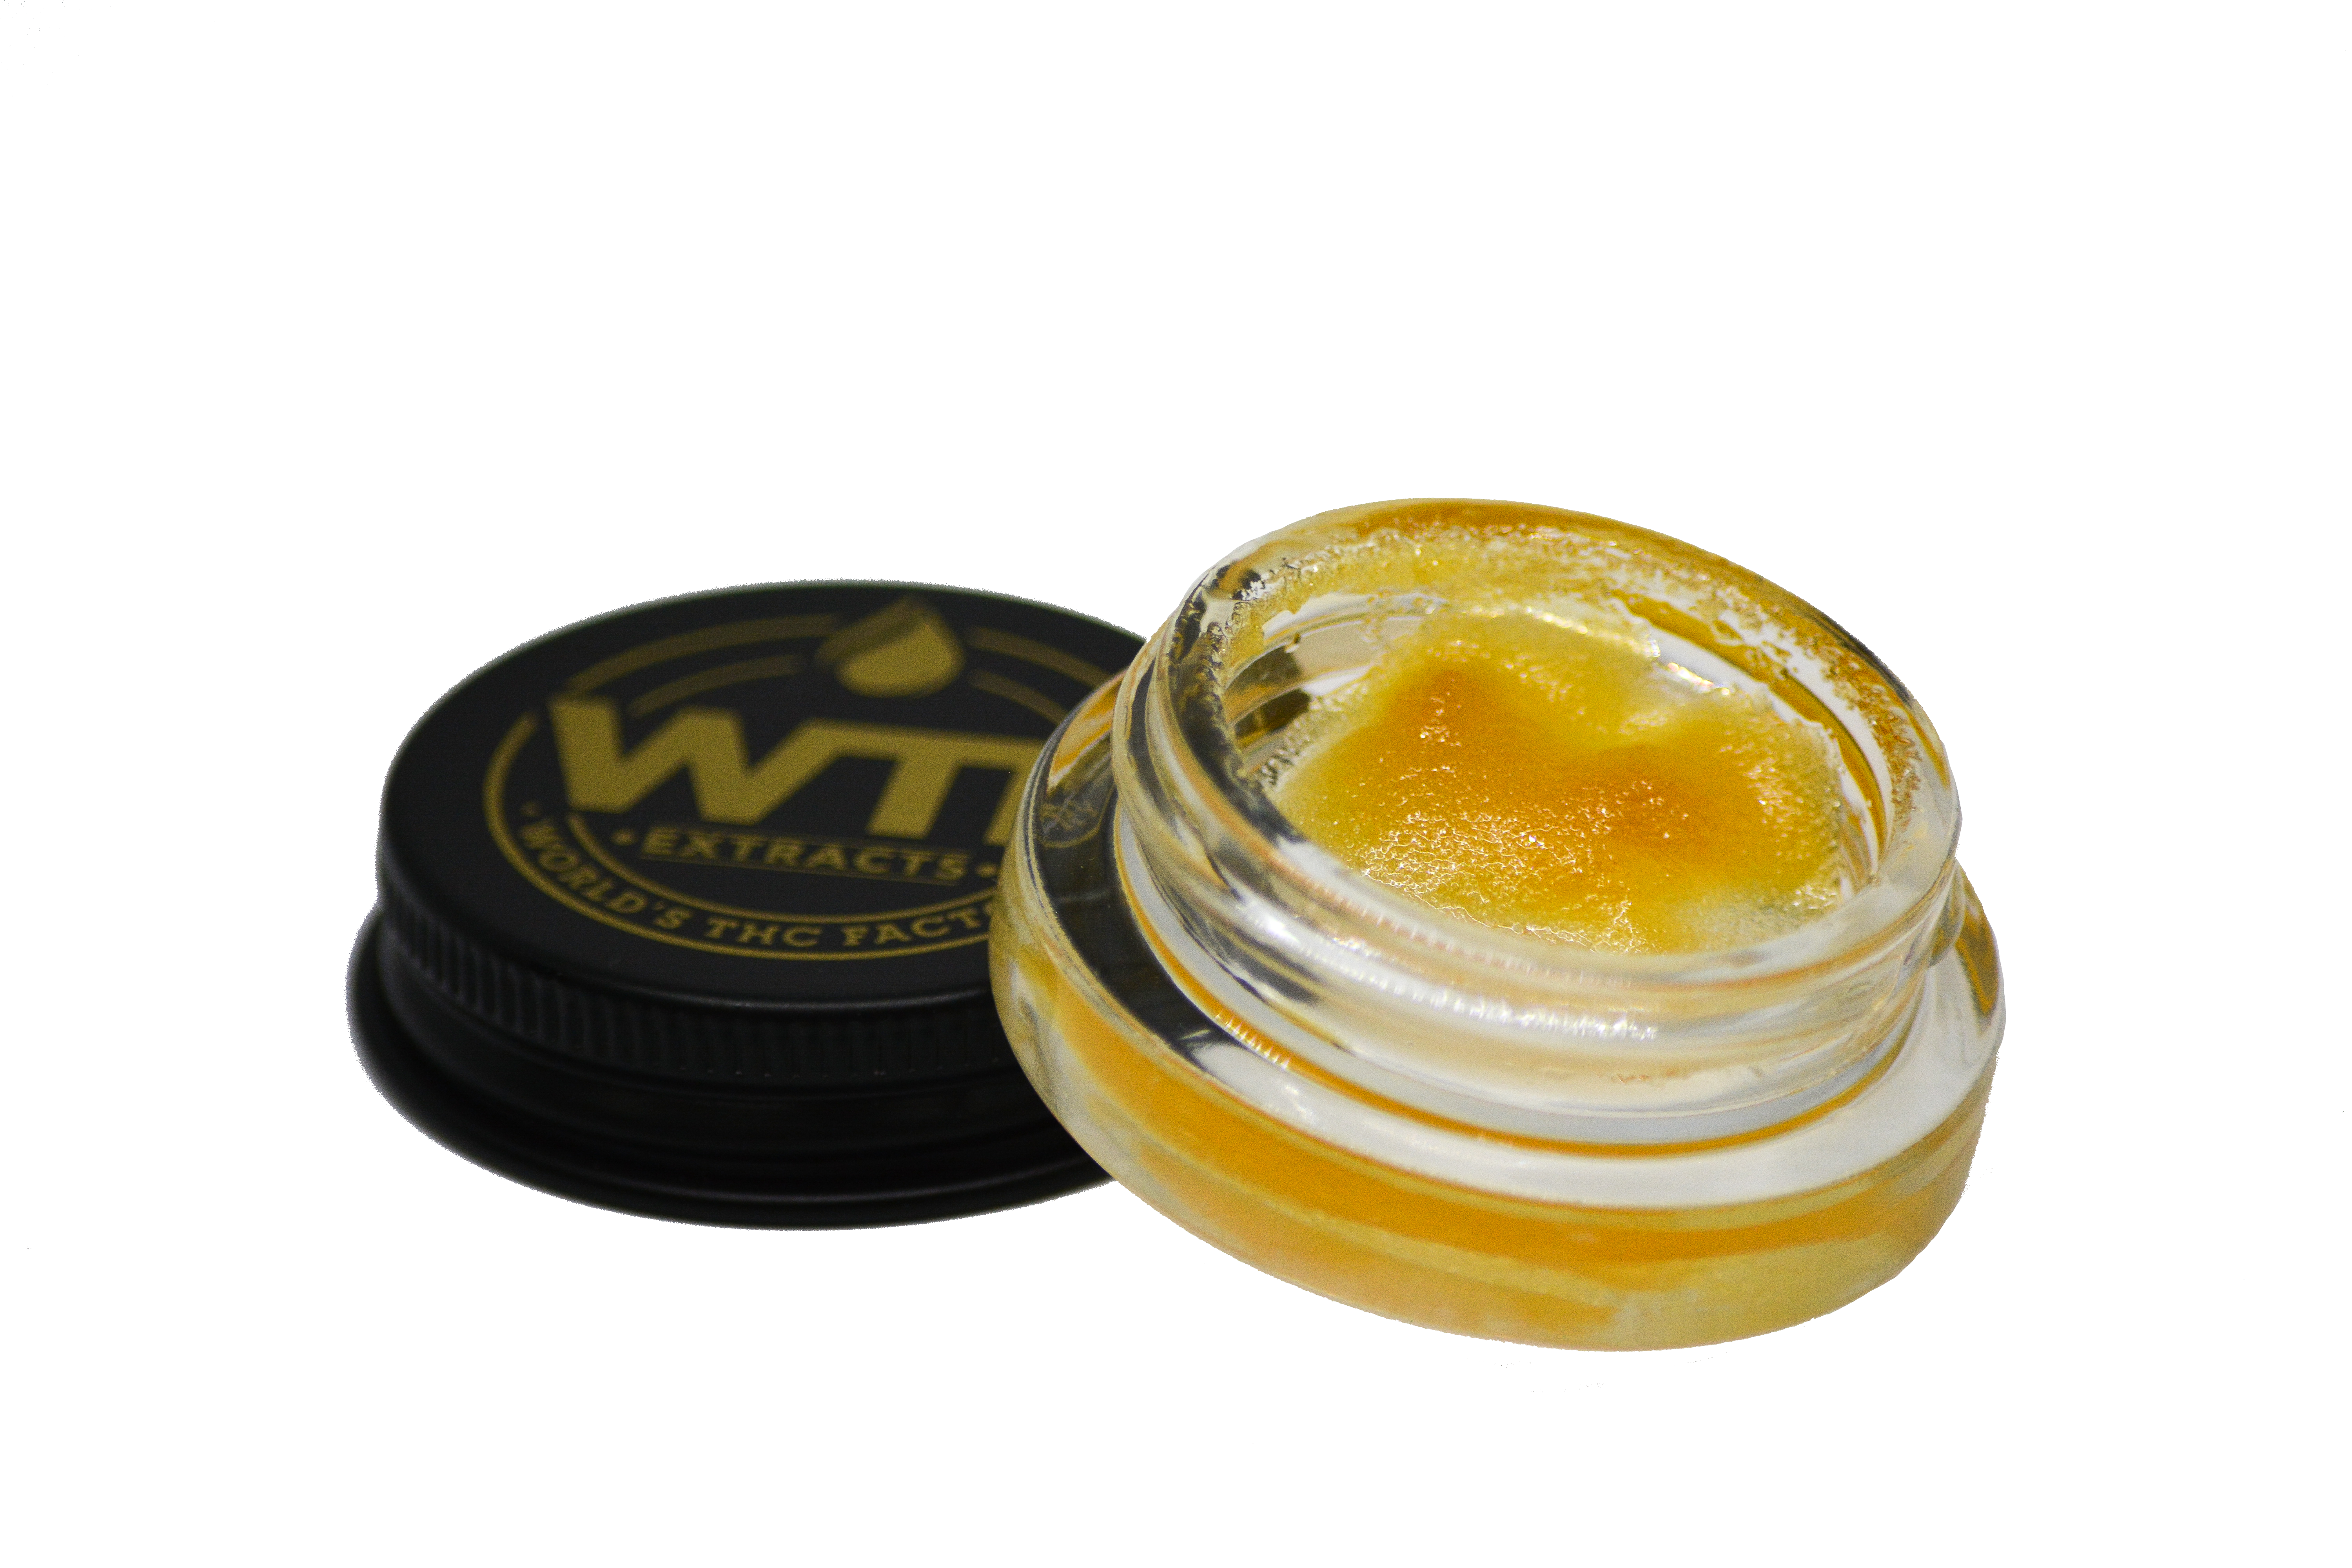 Exquisite WTF Apple Sauce cannabis resin in a premium glass jar